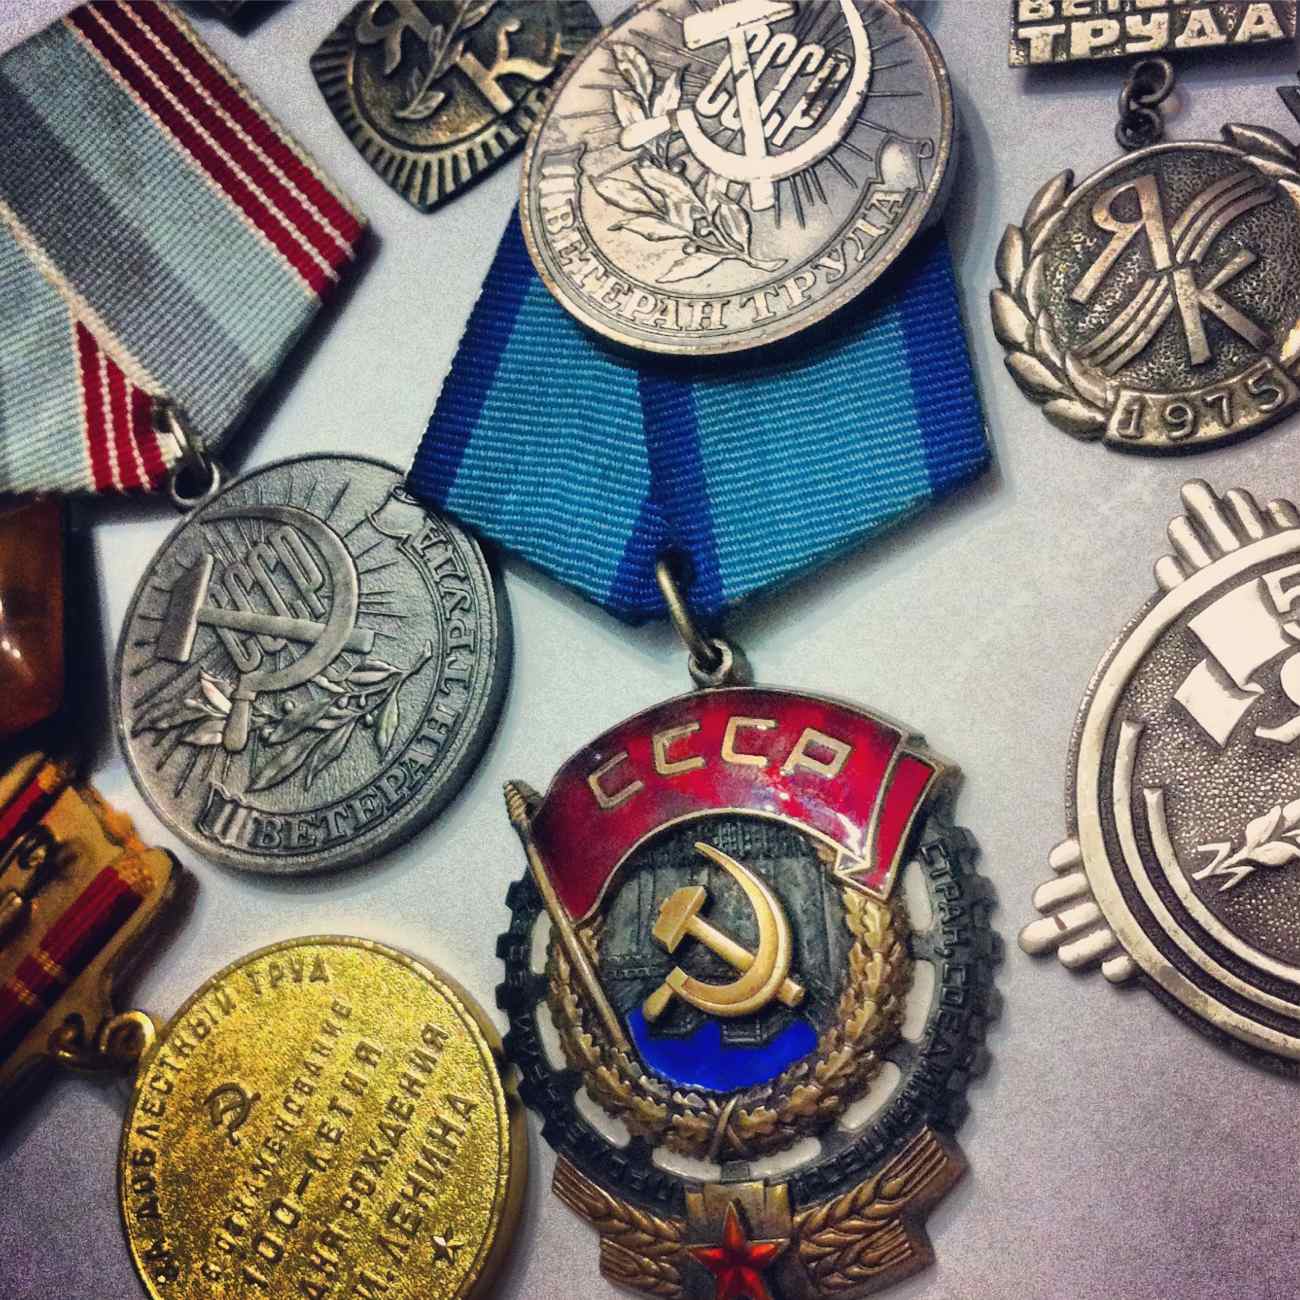 USSR medals awarded to Sasha and Lida for hard work